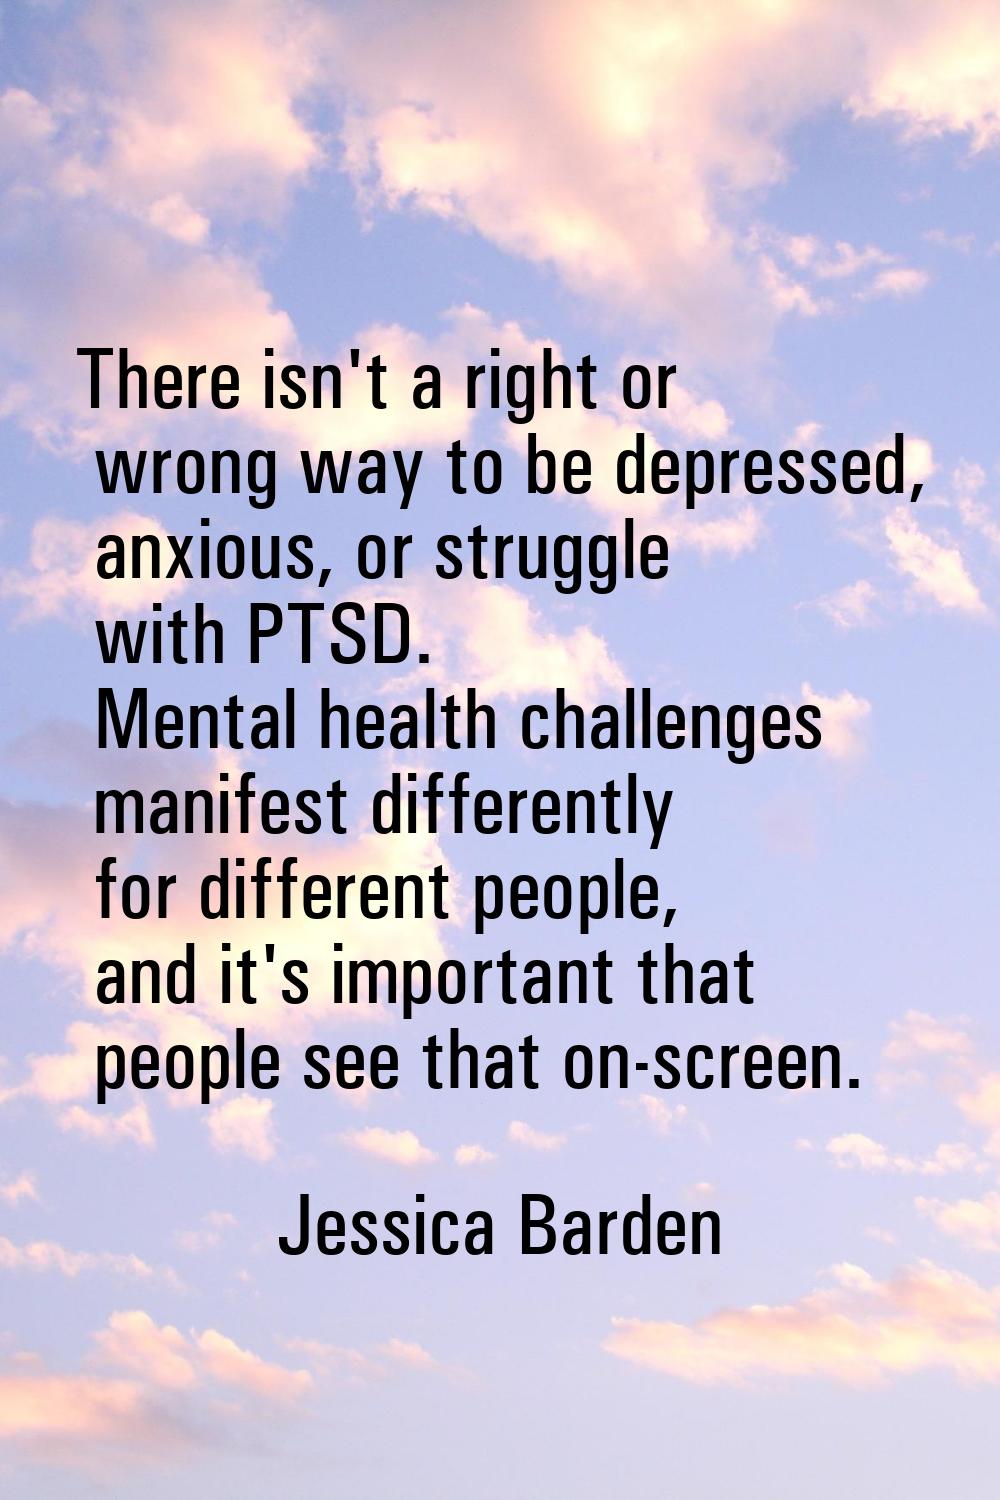 There isn't a right or wrong way to be depressed, anxious, or struggle with PTSD. Mental health cha